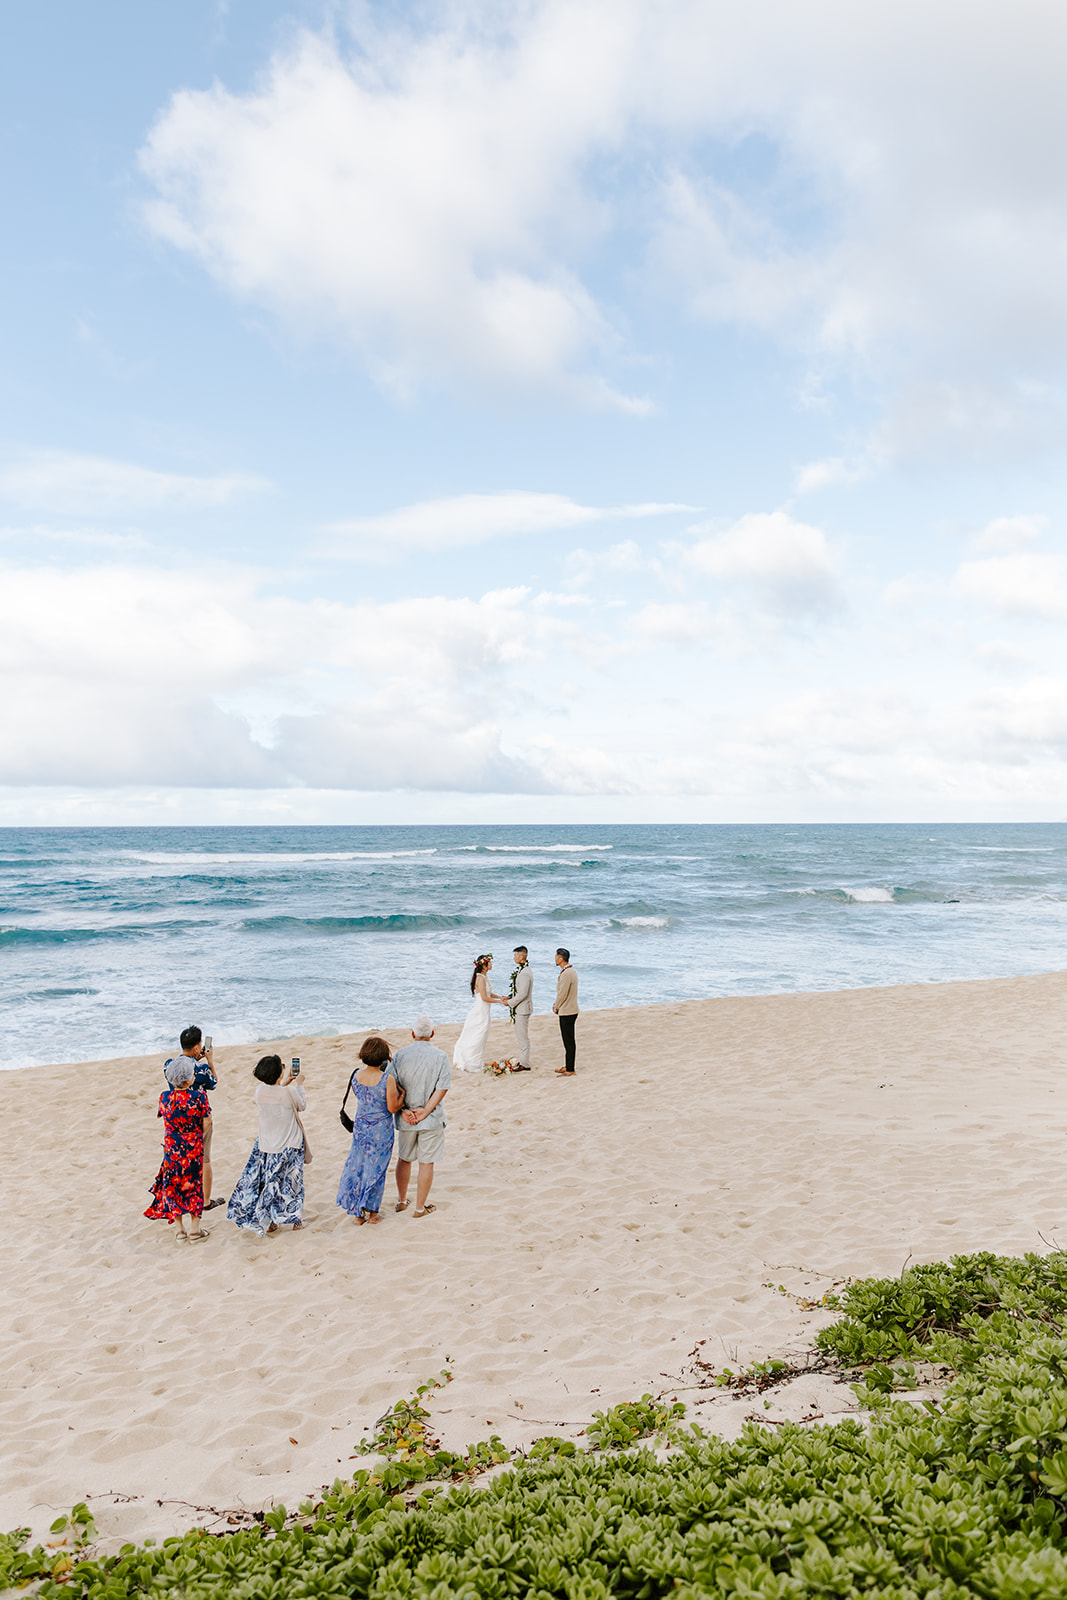 A couple who eloped on the North Shore of Oahu say their vows near Haleiwa on a secluded beach in Hawaii. 